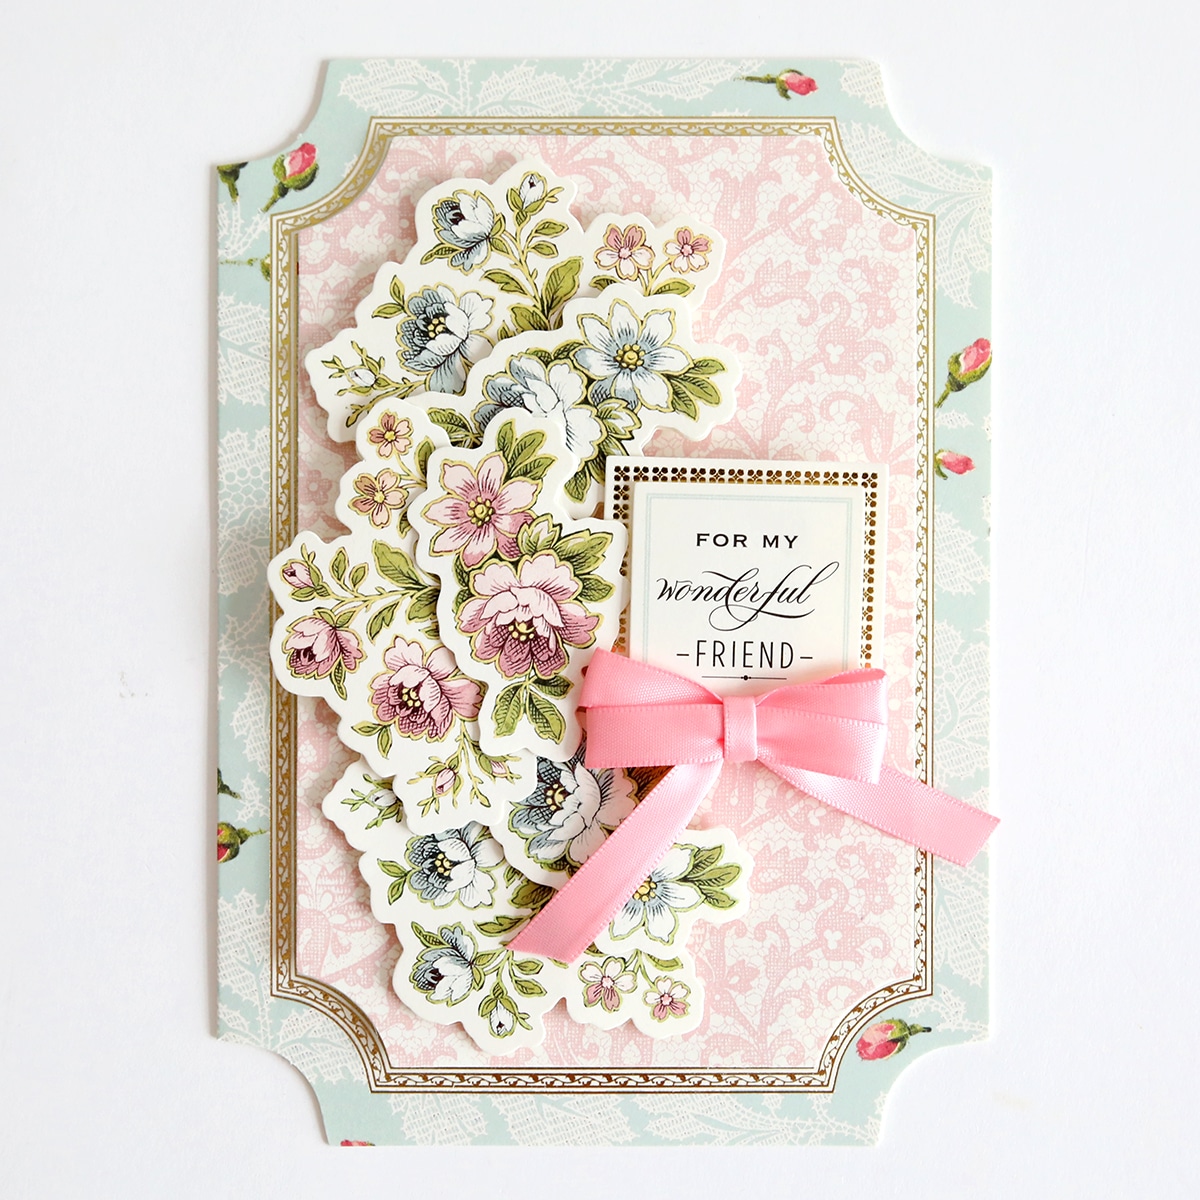 A card with a pink ribbon and flowers.